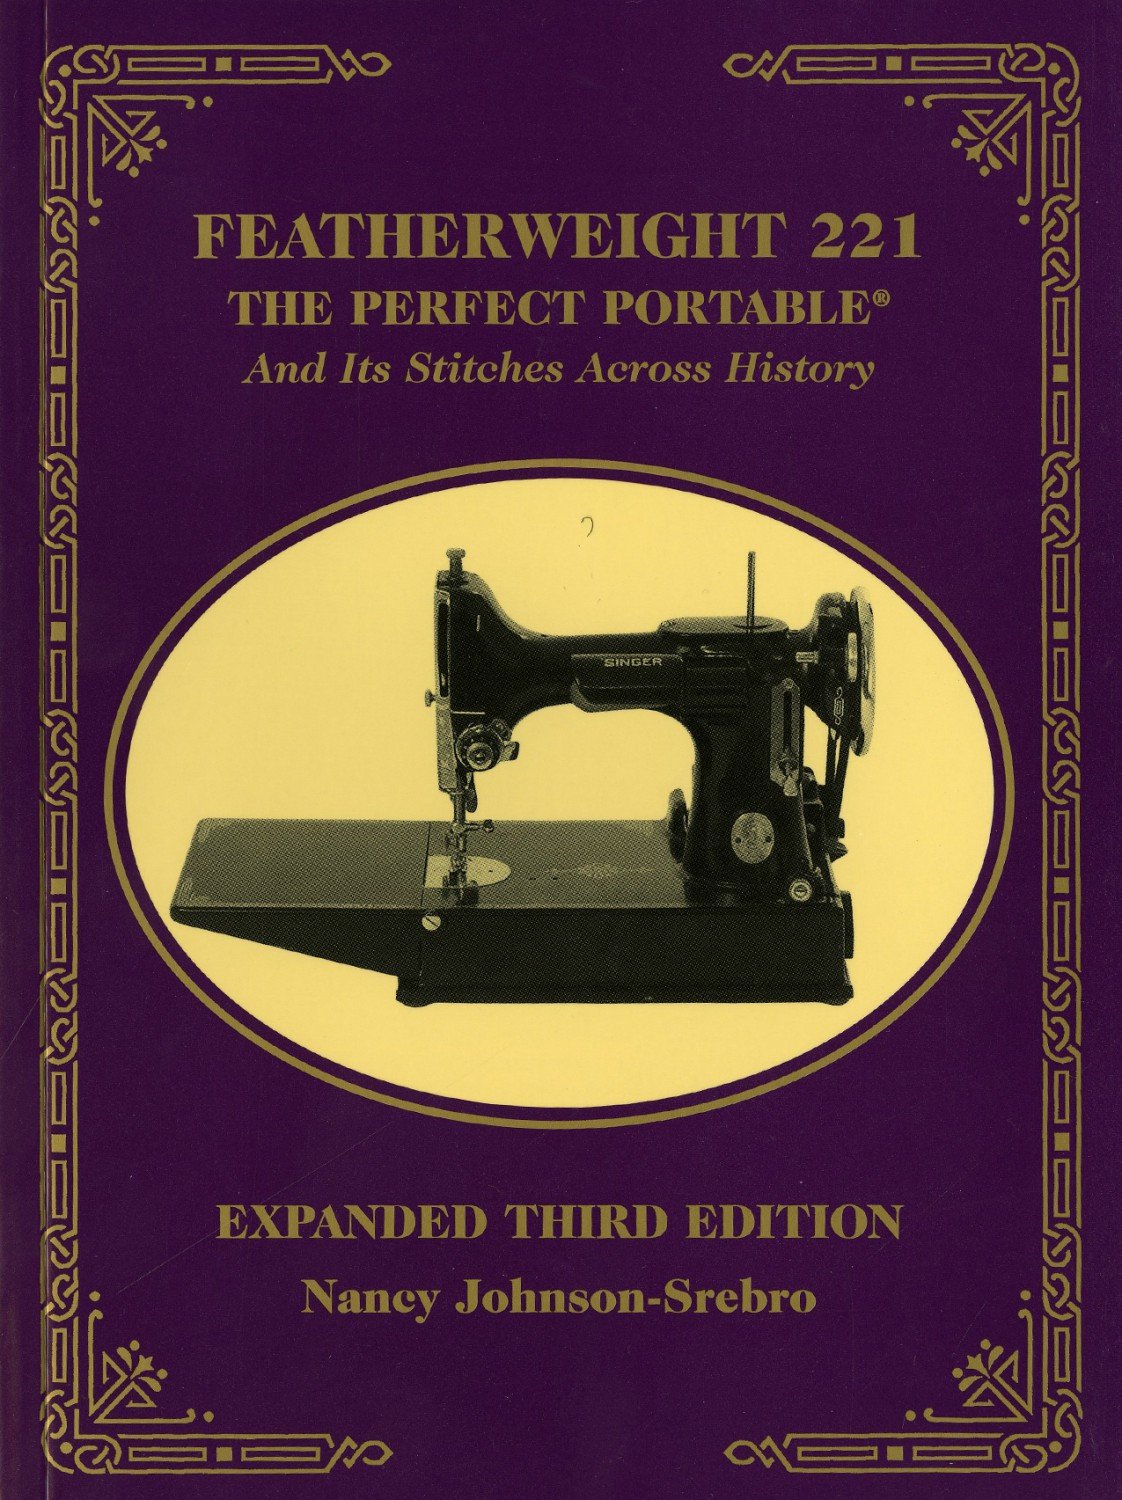 Featherweight 221 3rd ed